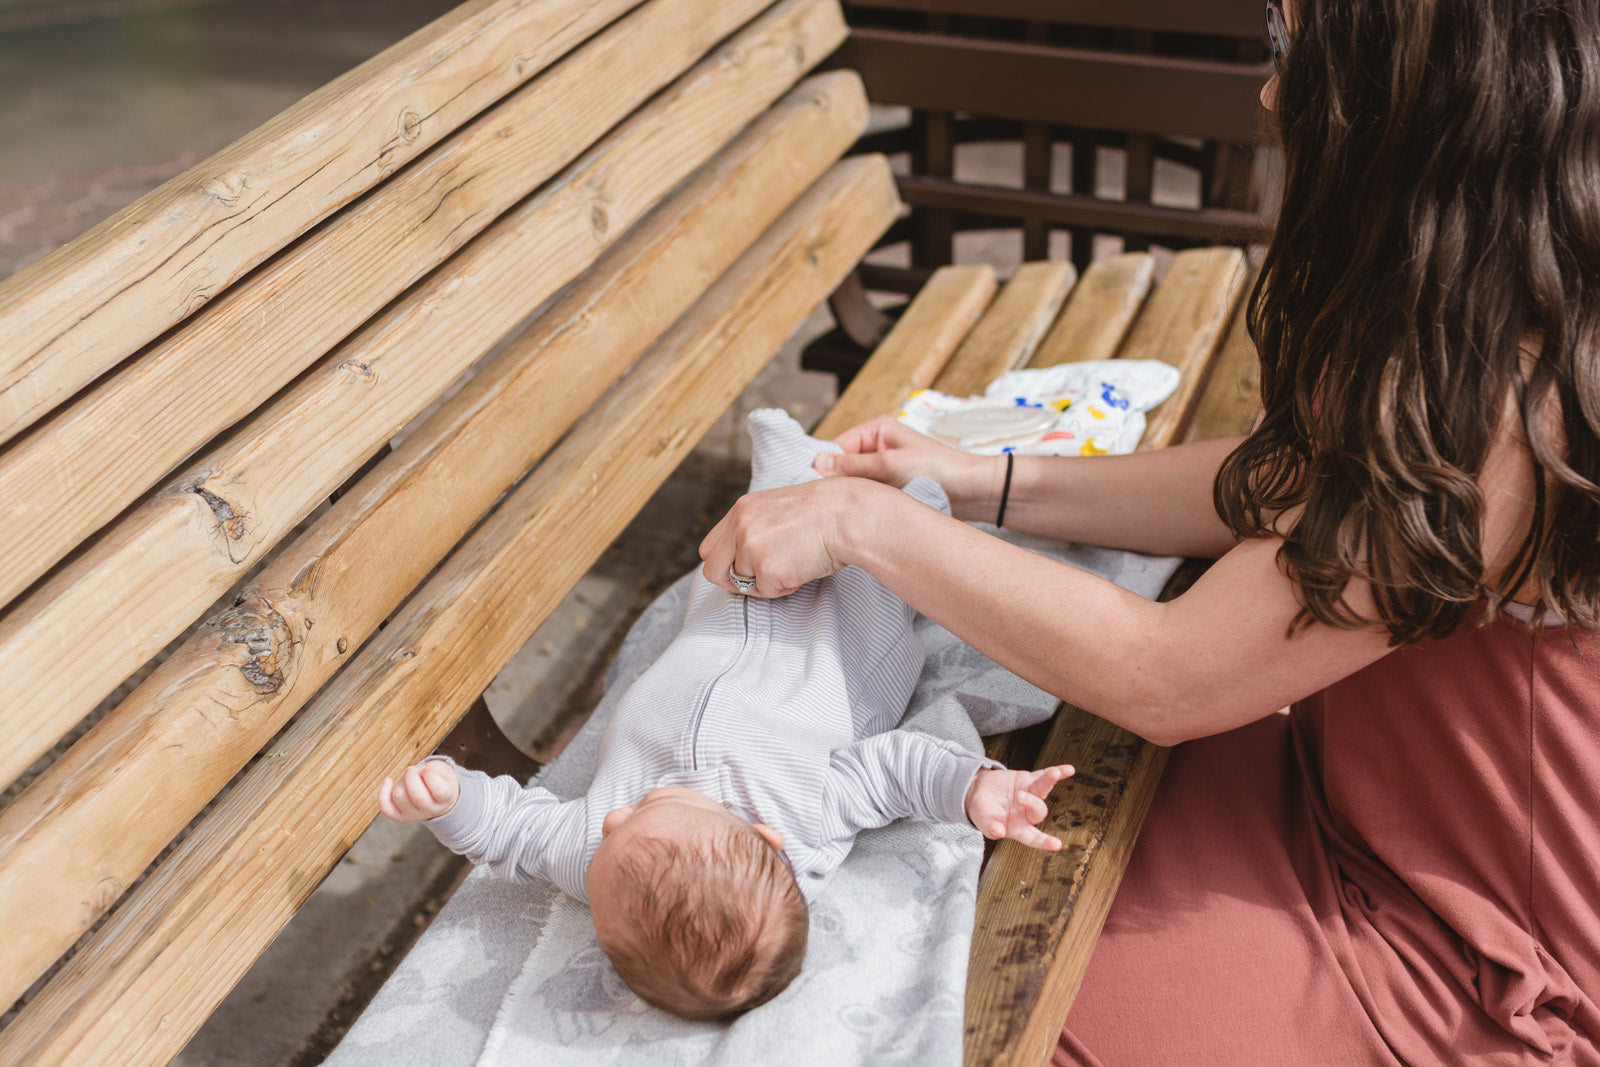 Changing a baby on park bench